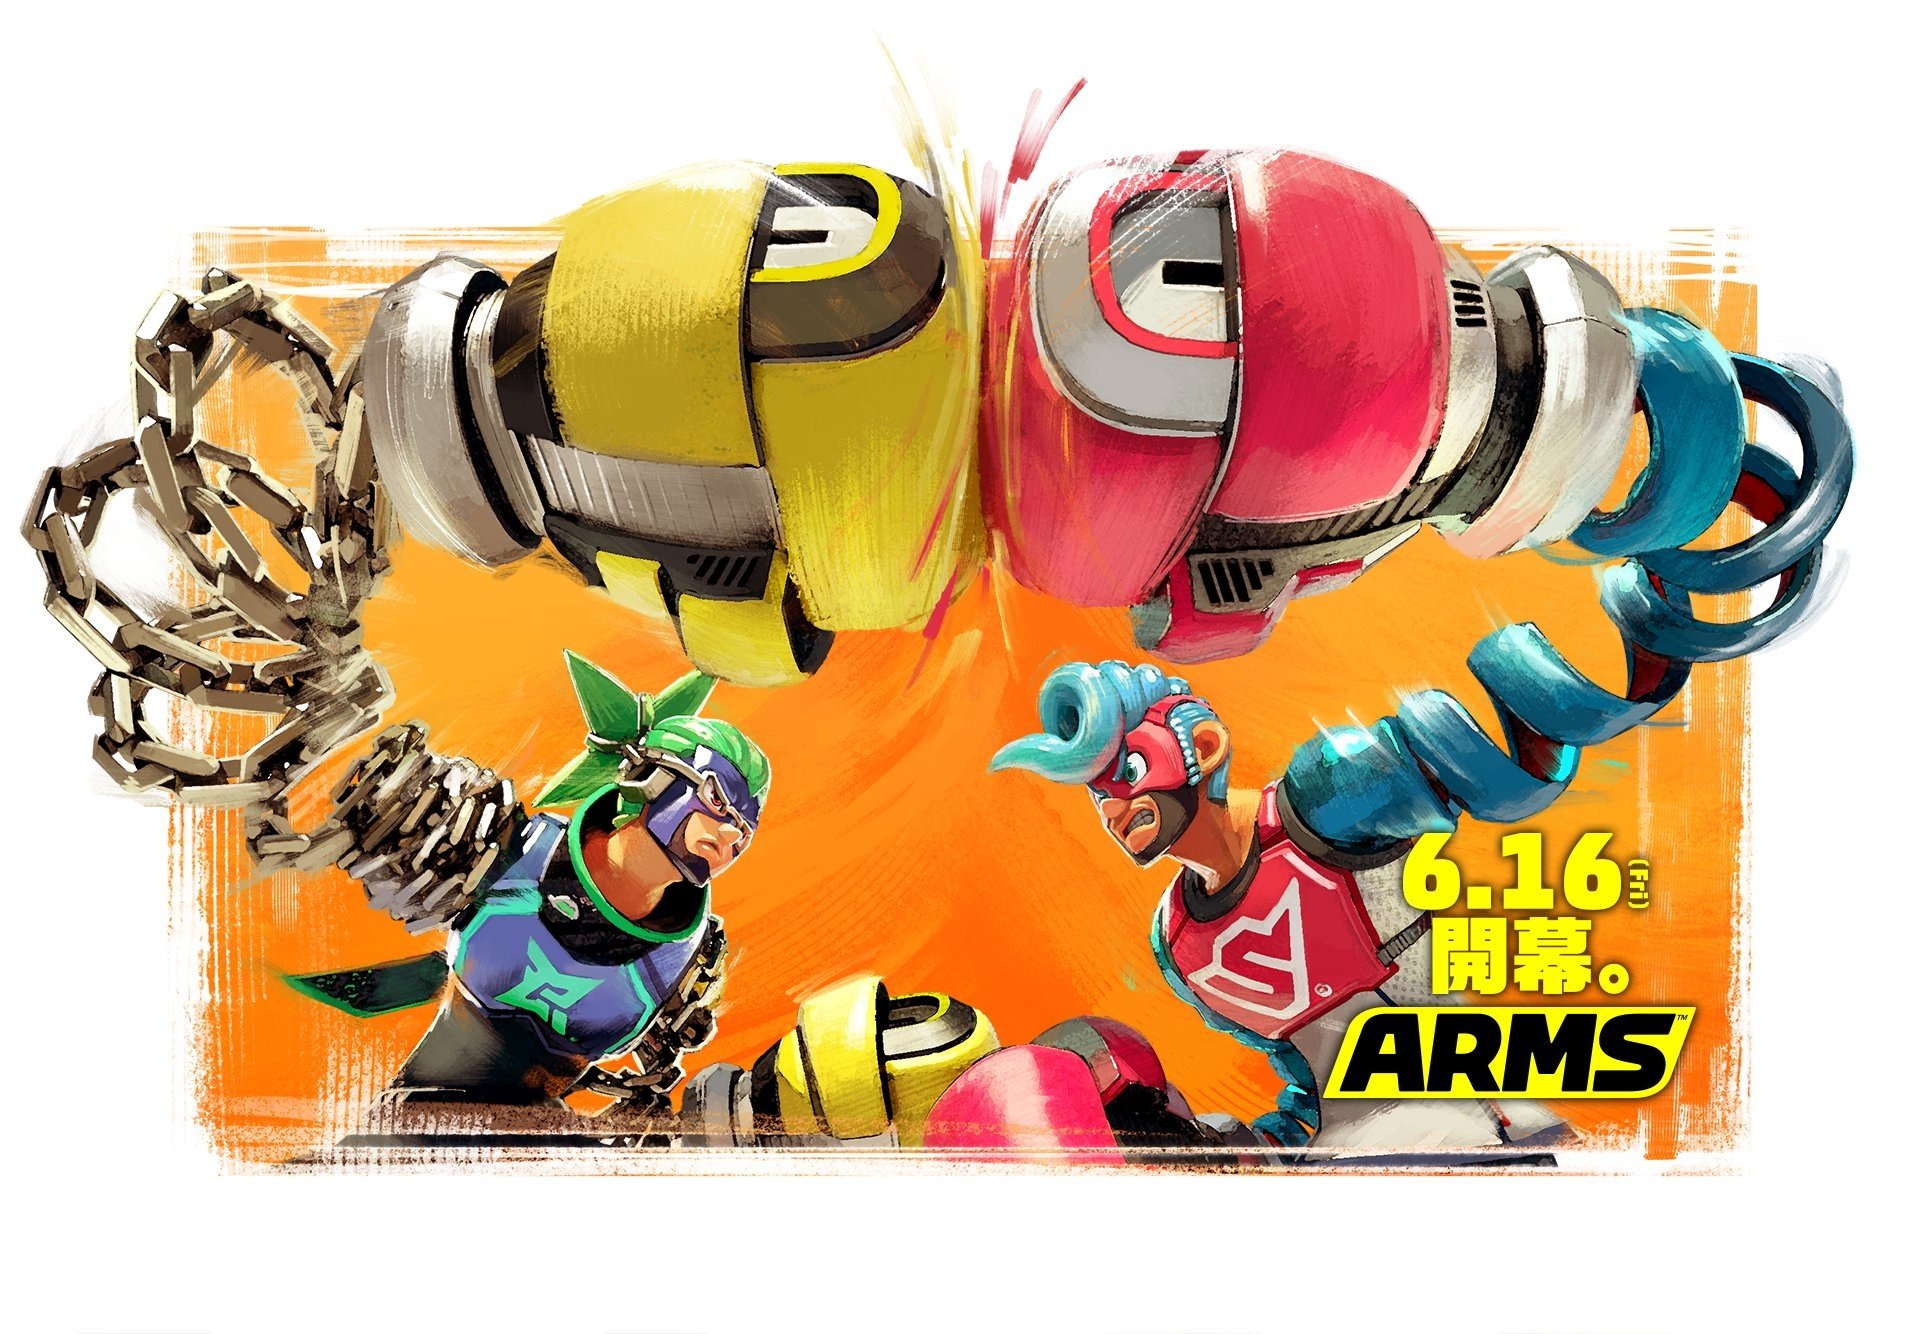 Spring Man Arms HD Wallpaper Background Image